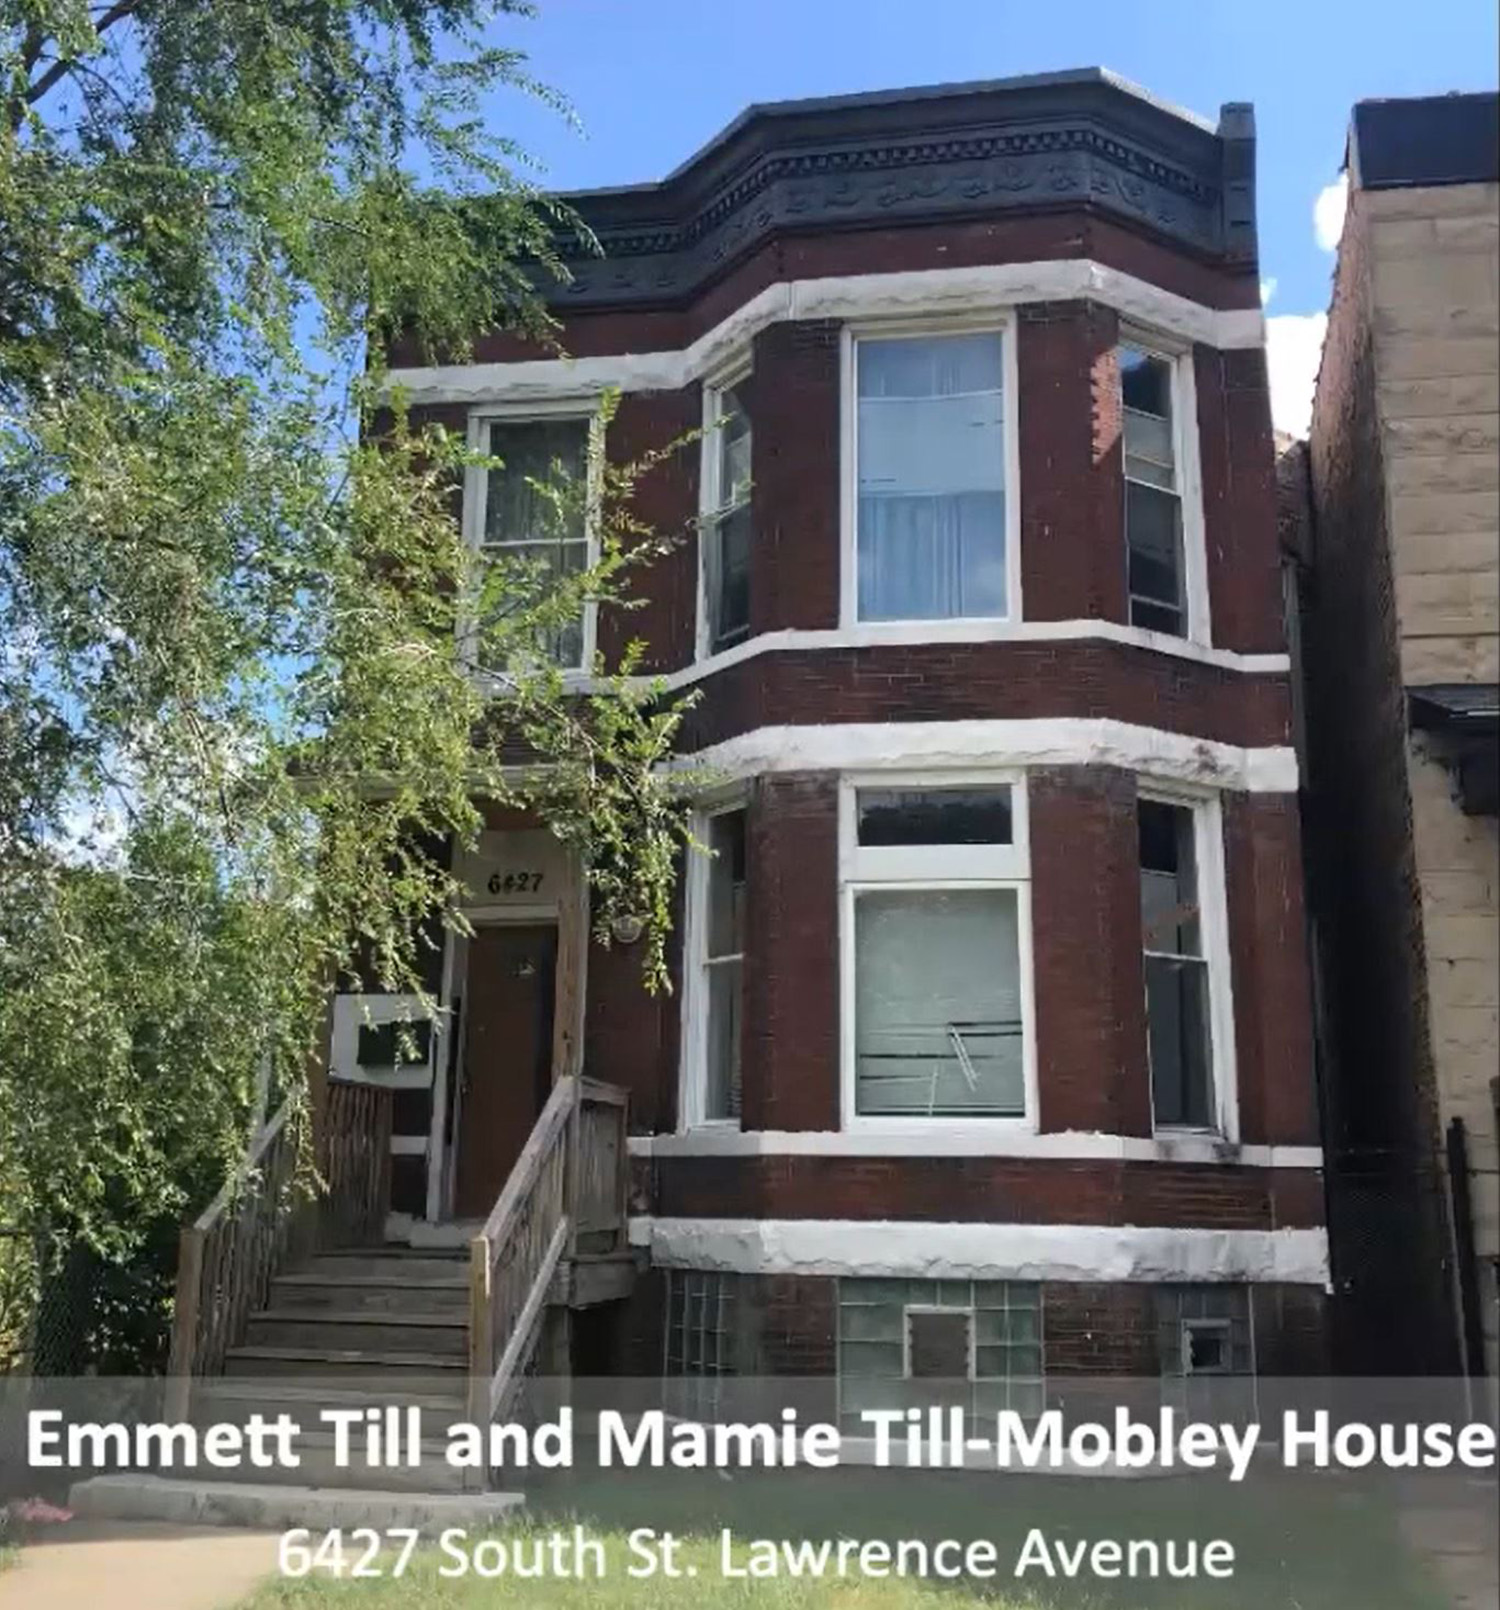 Emmett Till and Mamie Till-Mobley House. Image by CCL